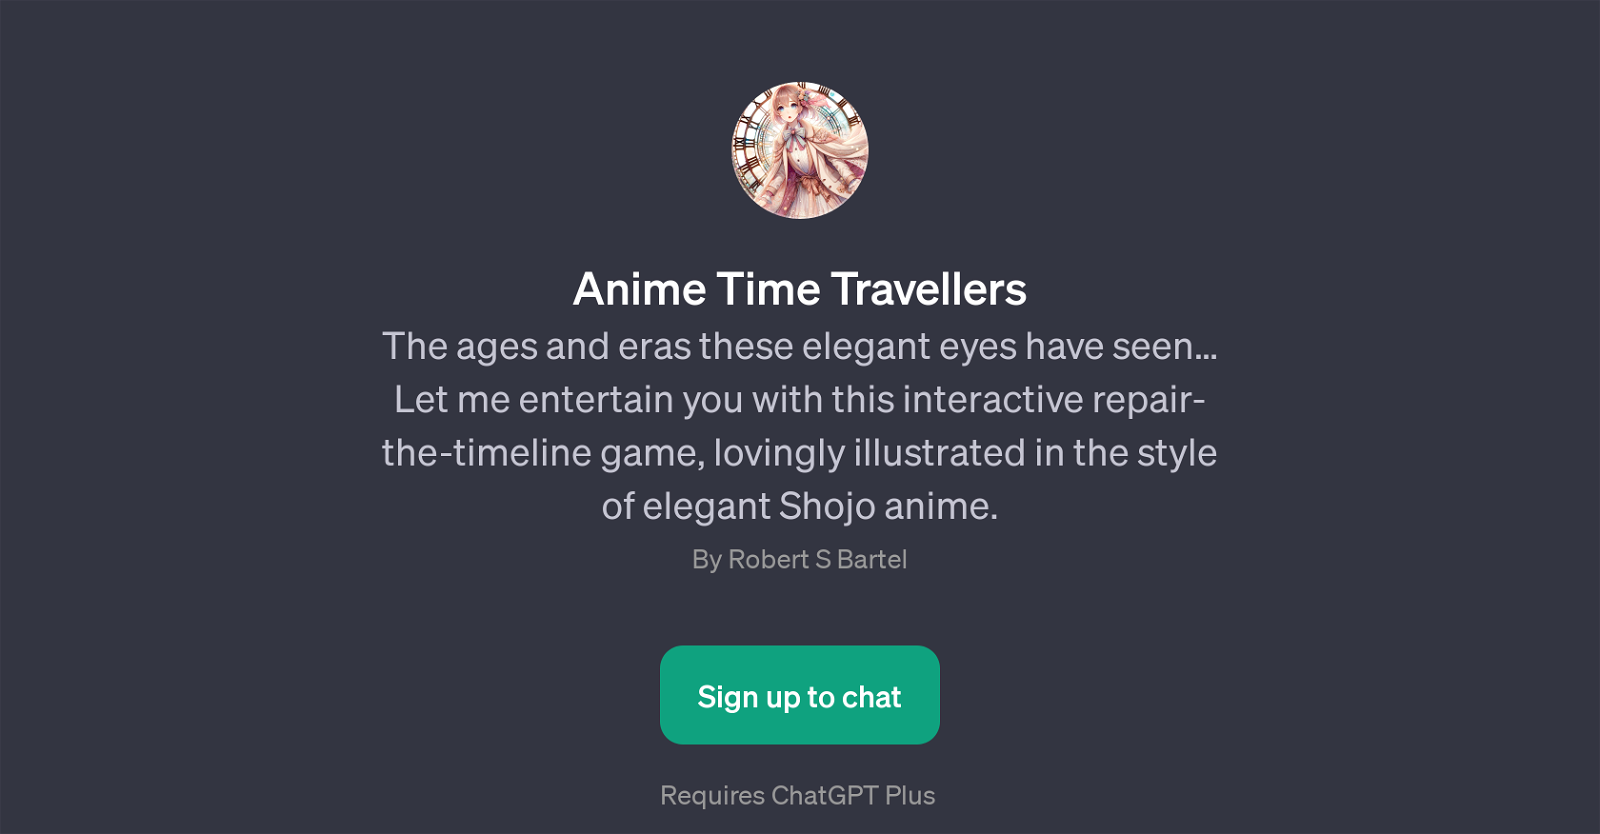 Anime Time Travellers website